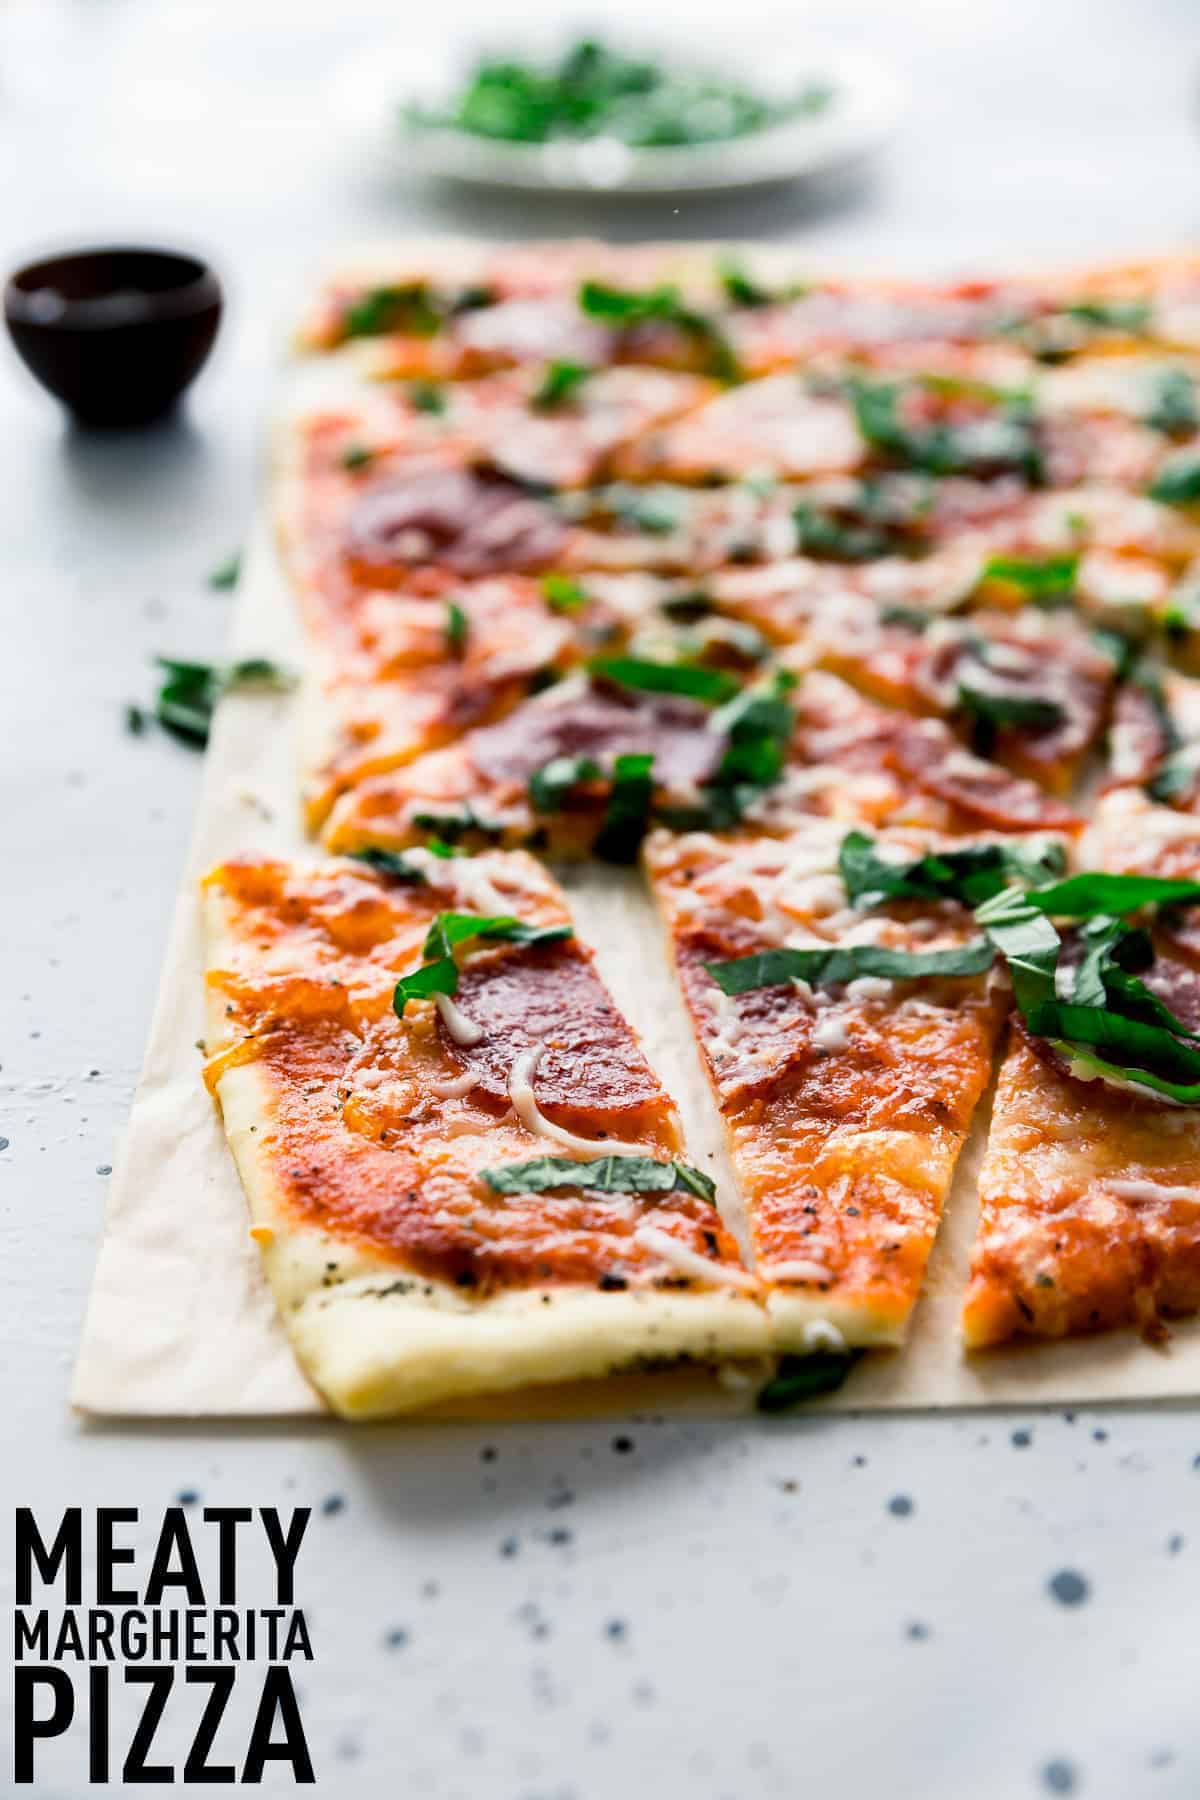 Meaty Margherita Pizza made with the traditional tomatoes, cheese, and basil but with added pepperoni and salami to make it one crowd pleasing pizza done in only 30 minutes.